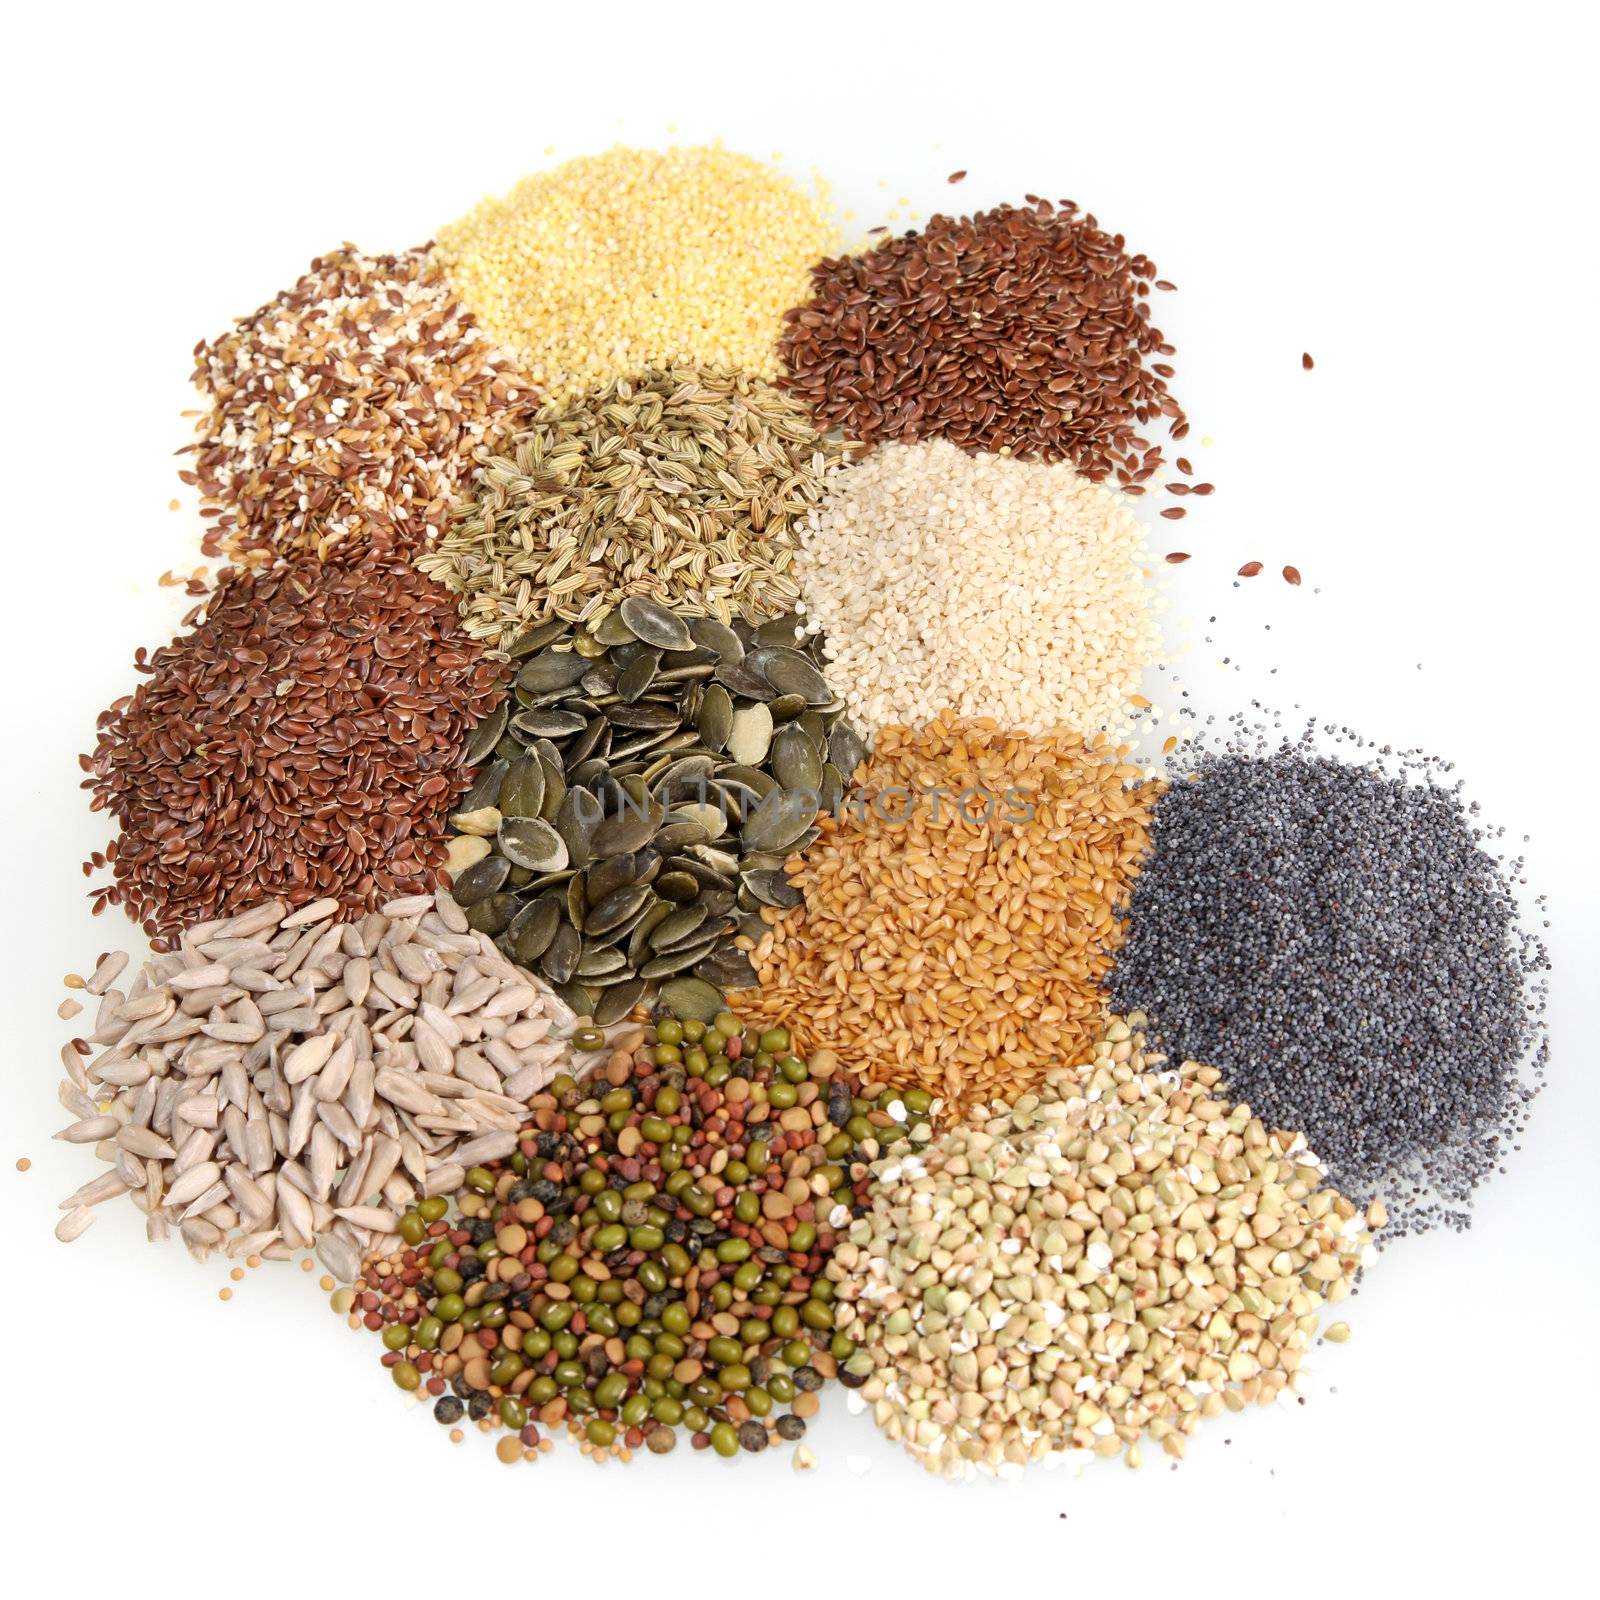 Overhead view of a large assortment of edible raw seeds including shelled and whole sunflower, poppy, legumes, sesame and linseed used as a seasoning and ingredient in cooking or for their oil content